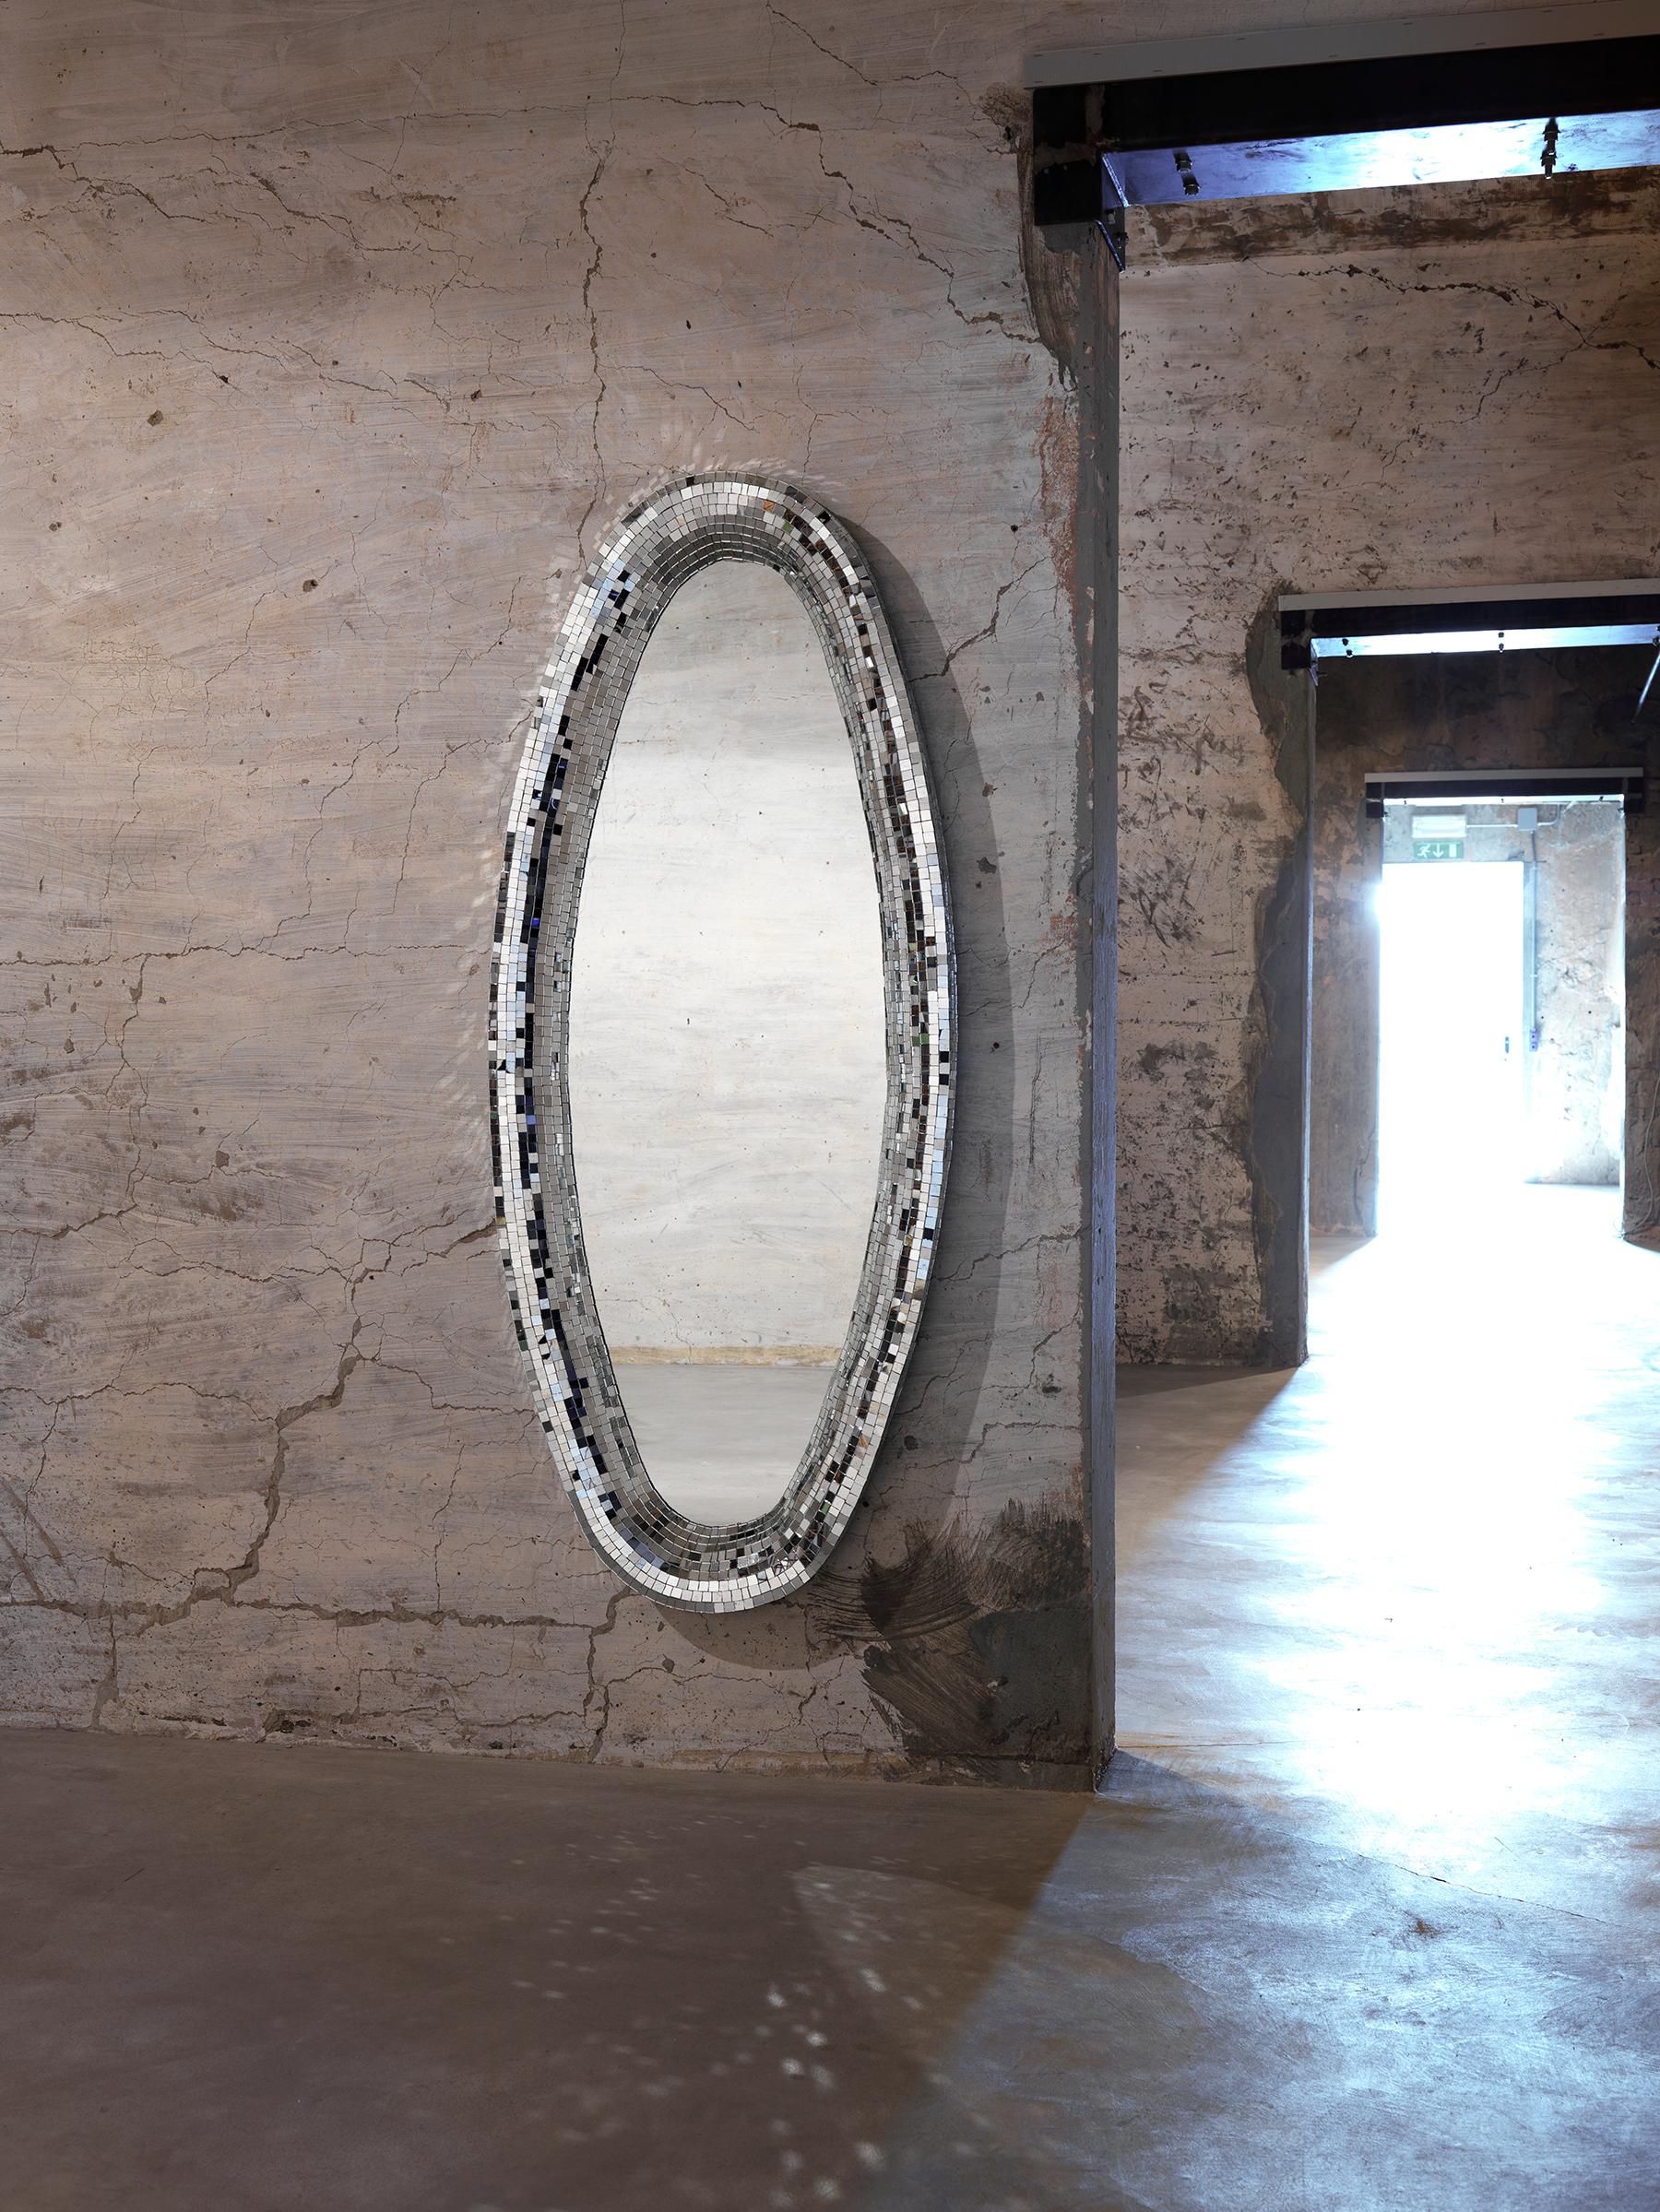 Silver Atollo mirror by Davide Medri
Materials: mirror, glass mosaic (silver)
Also available in gold.
Dimensions: H 170 x D 70 cm

Davide Medri was born in Cesena on August 7th 1967 and graduated at the Academy of Fine Arts in Ravenna, the Gino